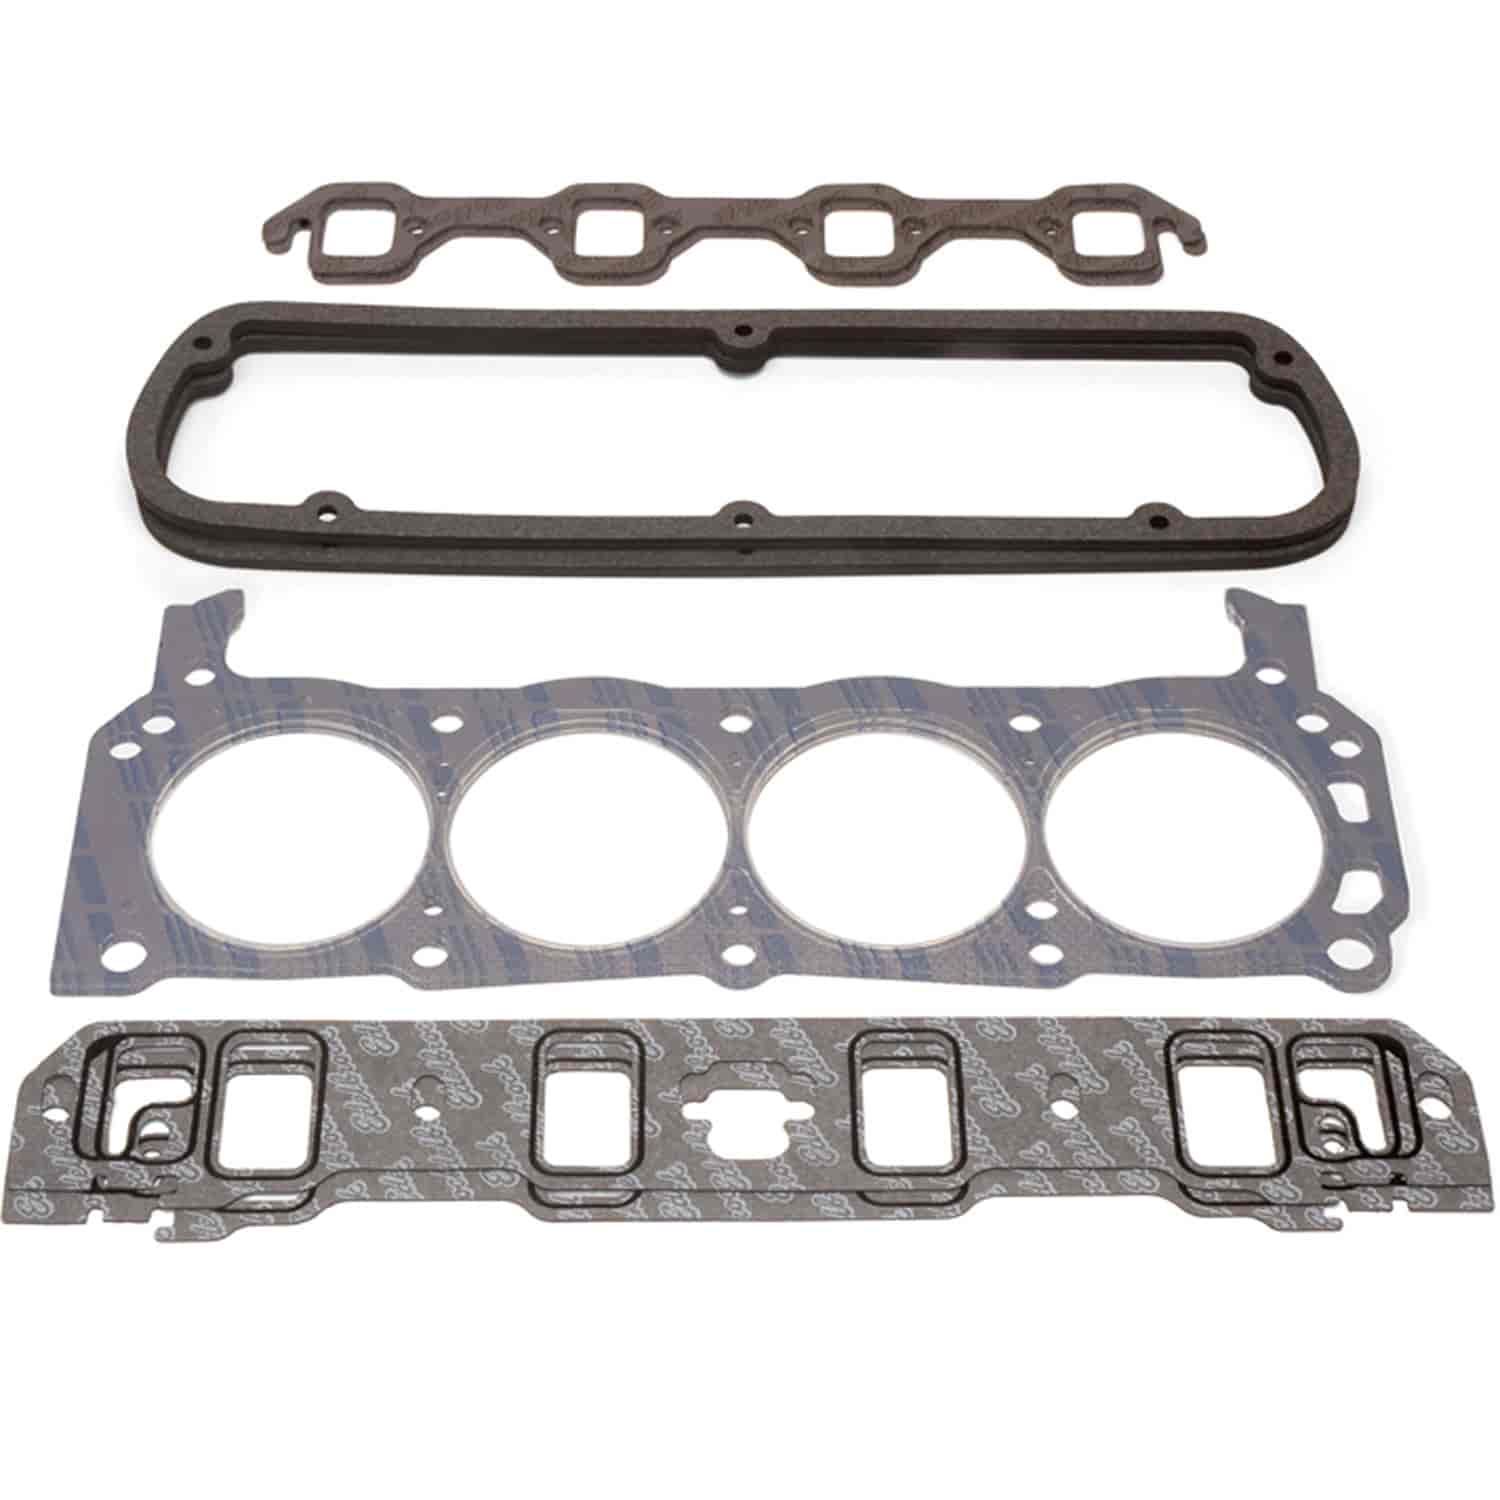 Complete Head Gasket Set for Small Block Ford 289-351W and 5.0L/5.8L